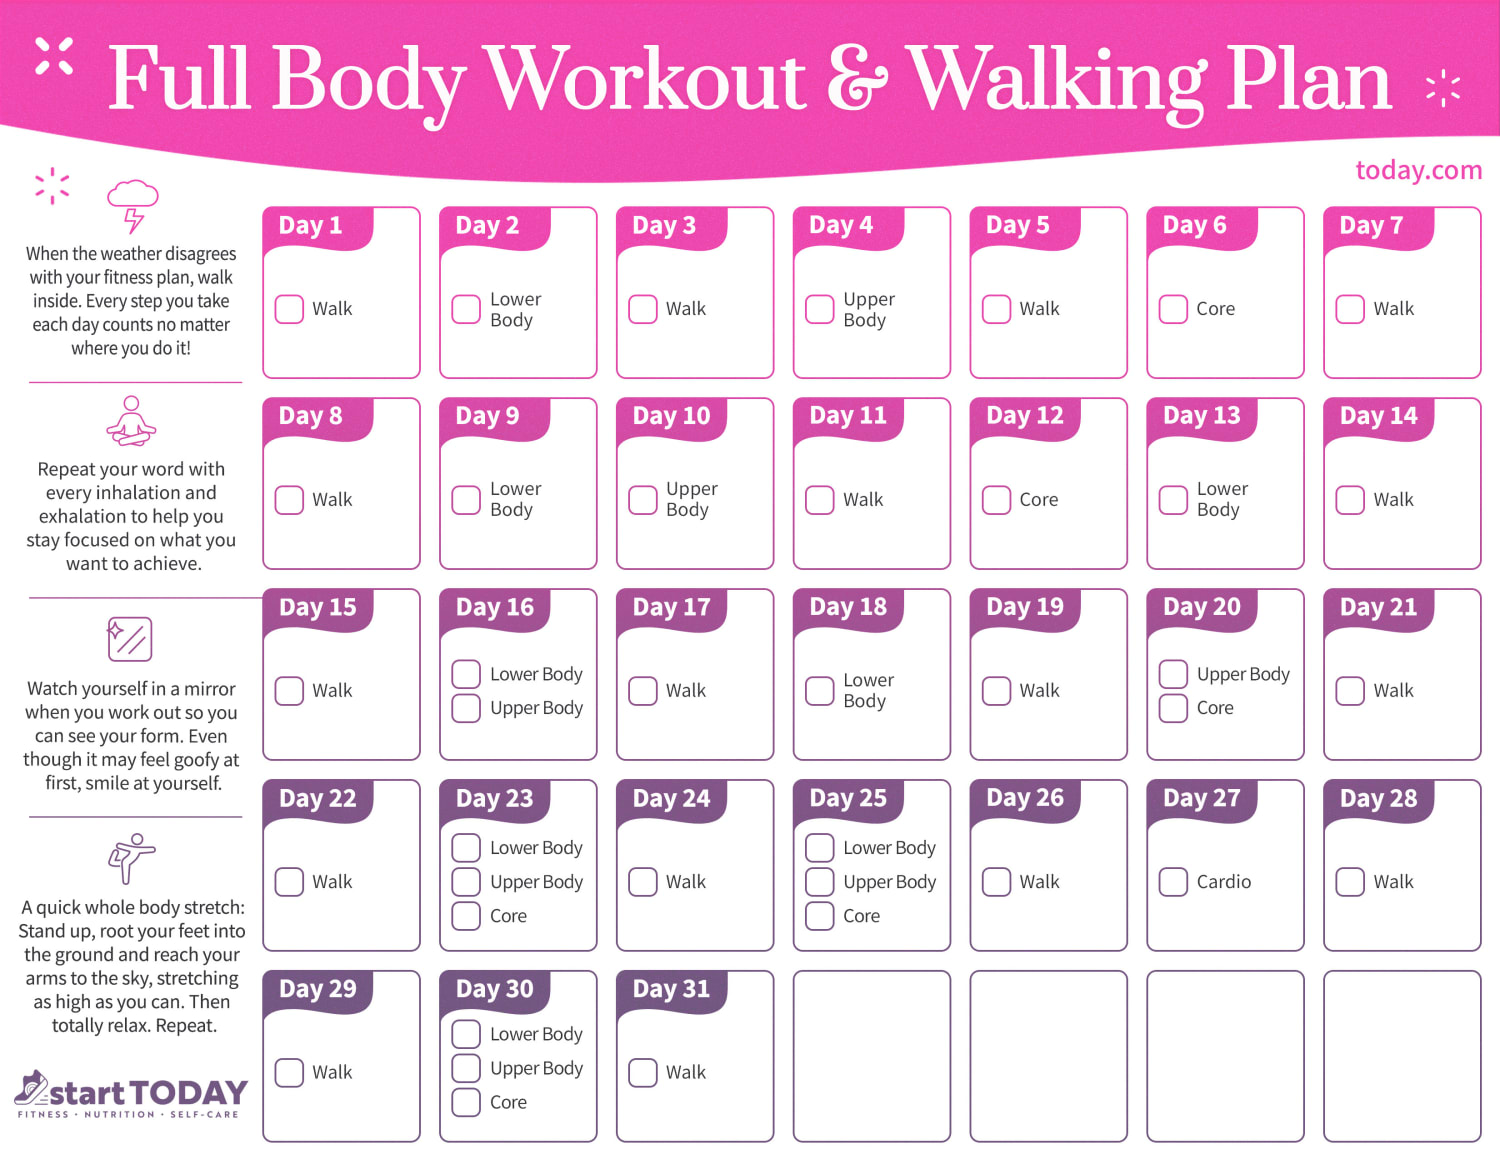 31-Day Workout Plan: Walk and Tone Arms to Build Strength